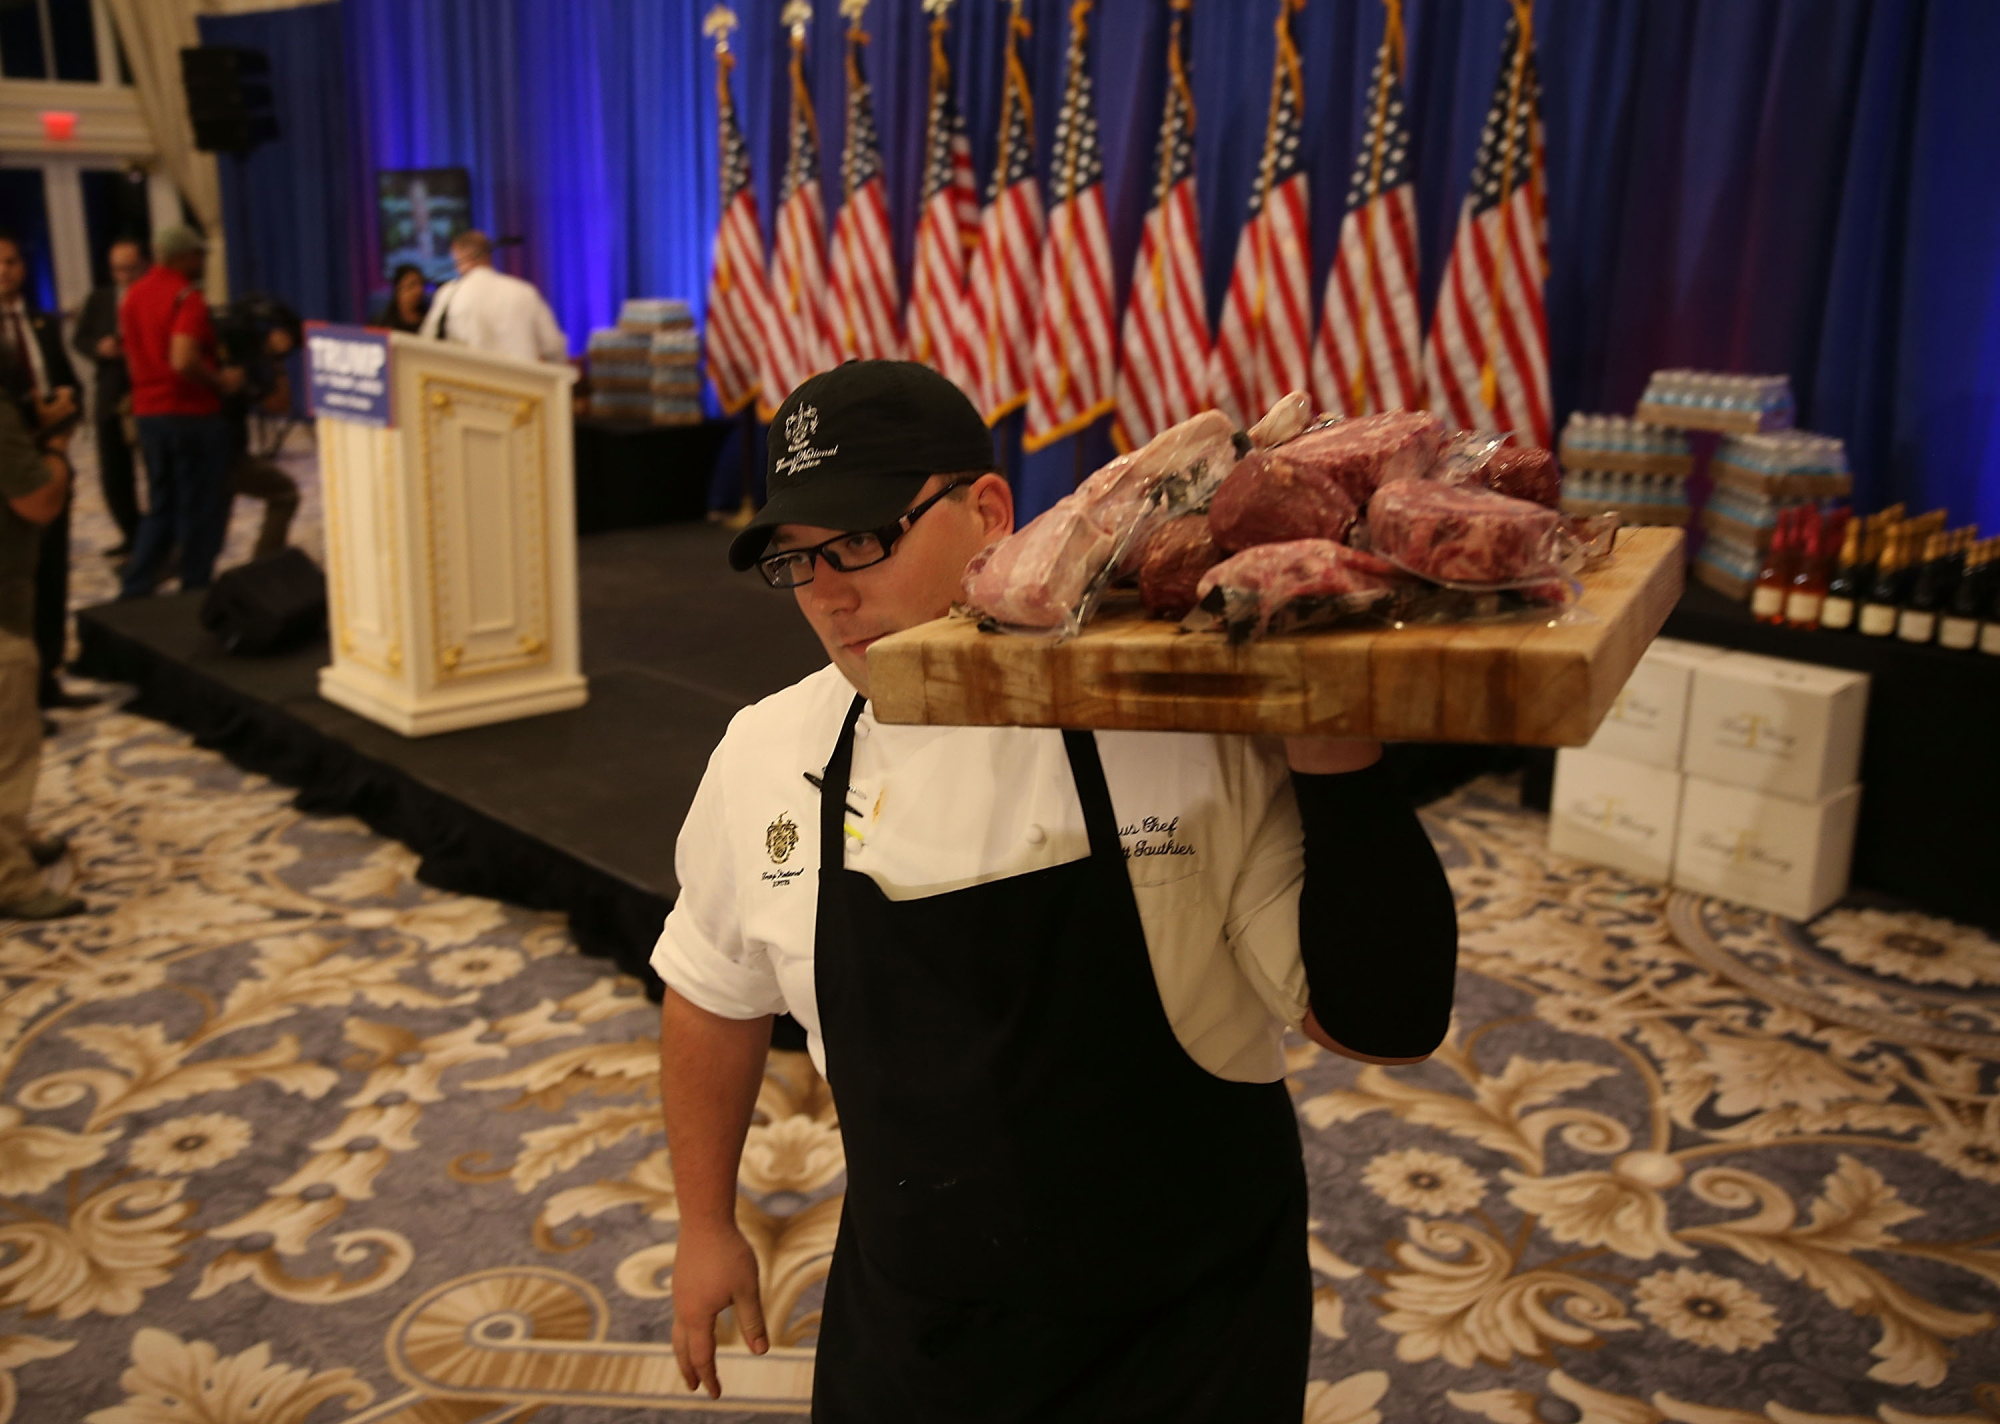 Top 9 beef cuts and how to cook them, according to a golf-club chef